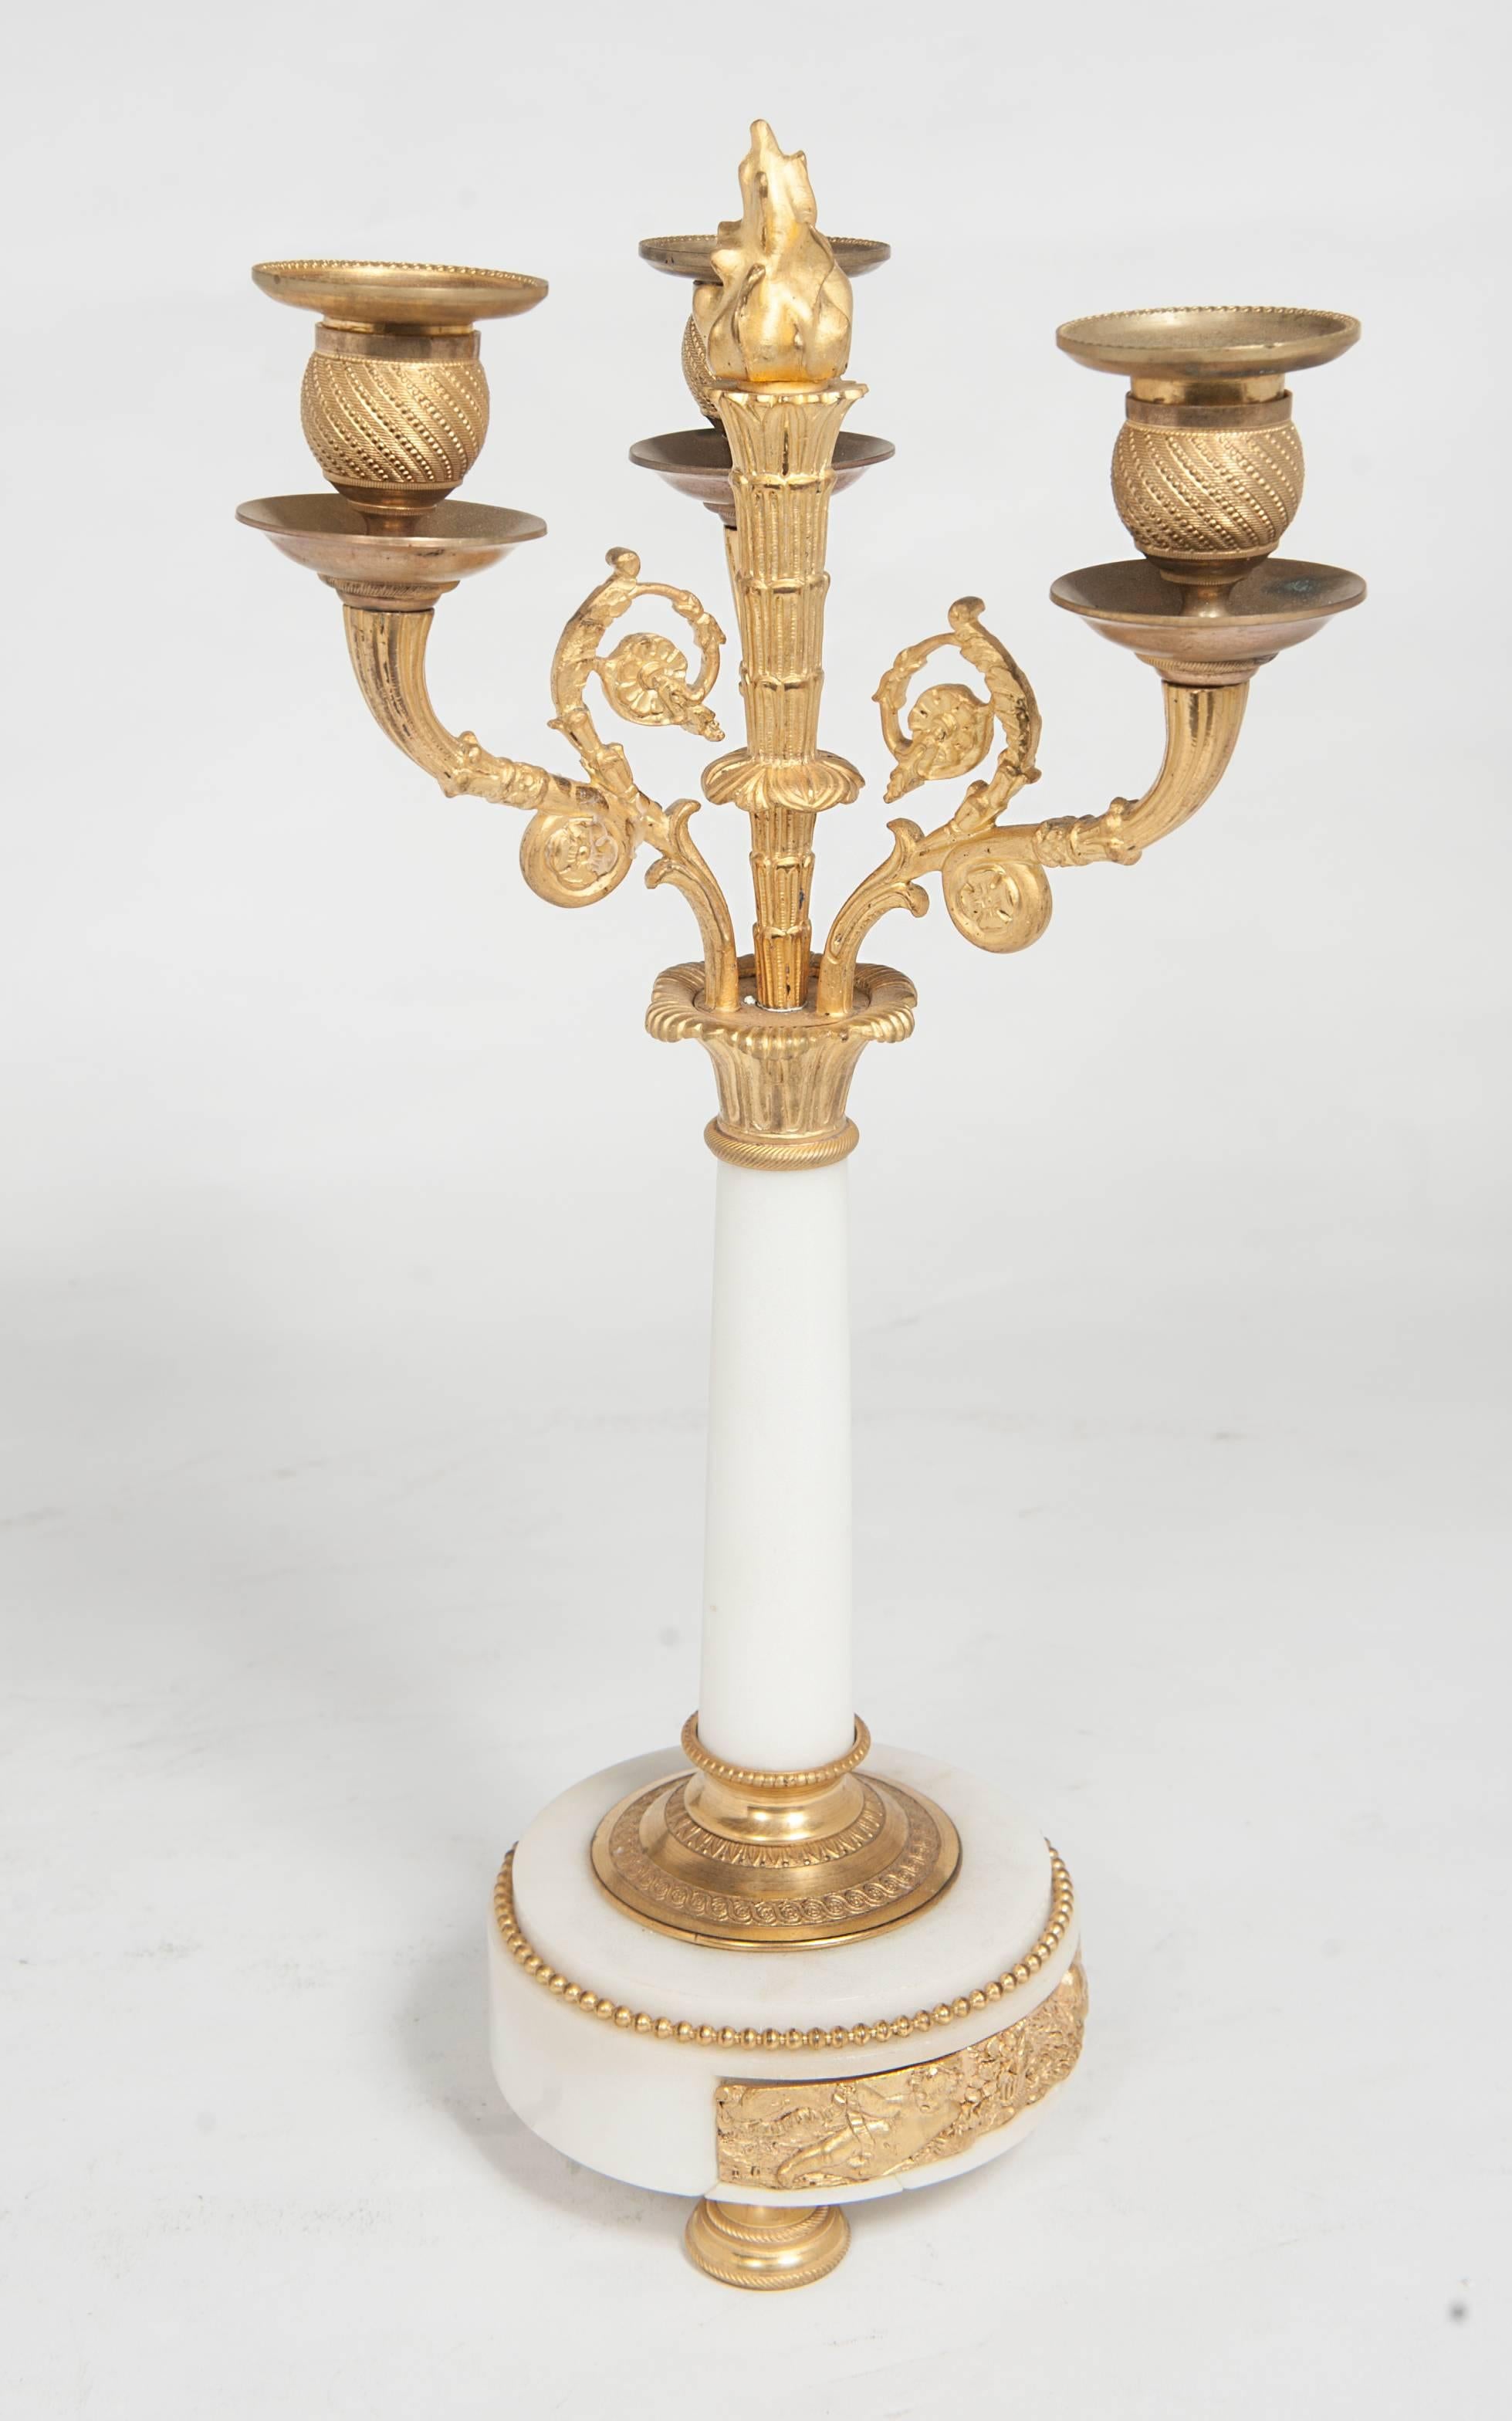 A nice pair of decorative 19th century Louis XVI inspired candlesticks, circa 1860.
The ormolu bronze and white marble is very Classic for this period.